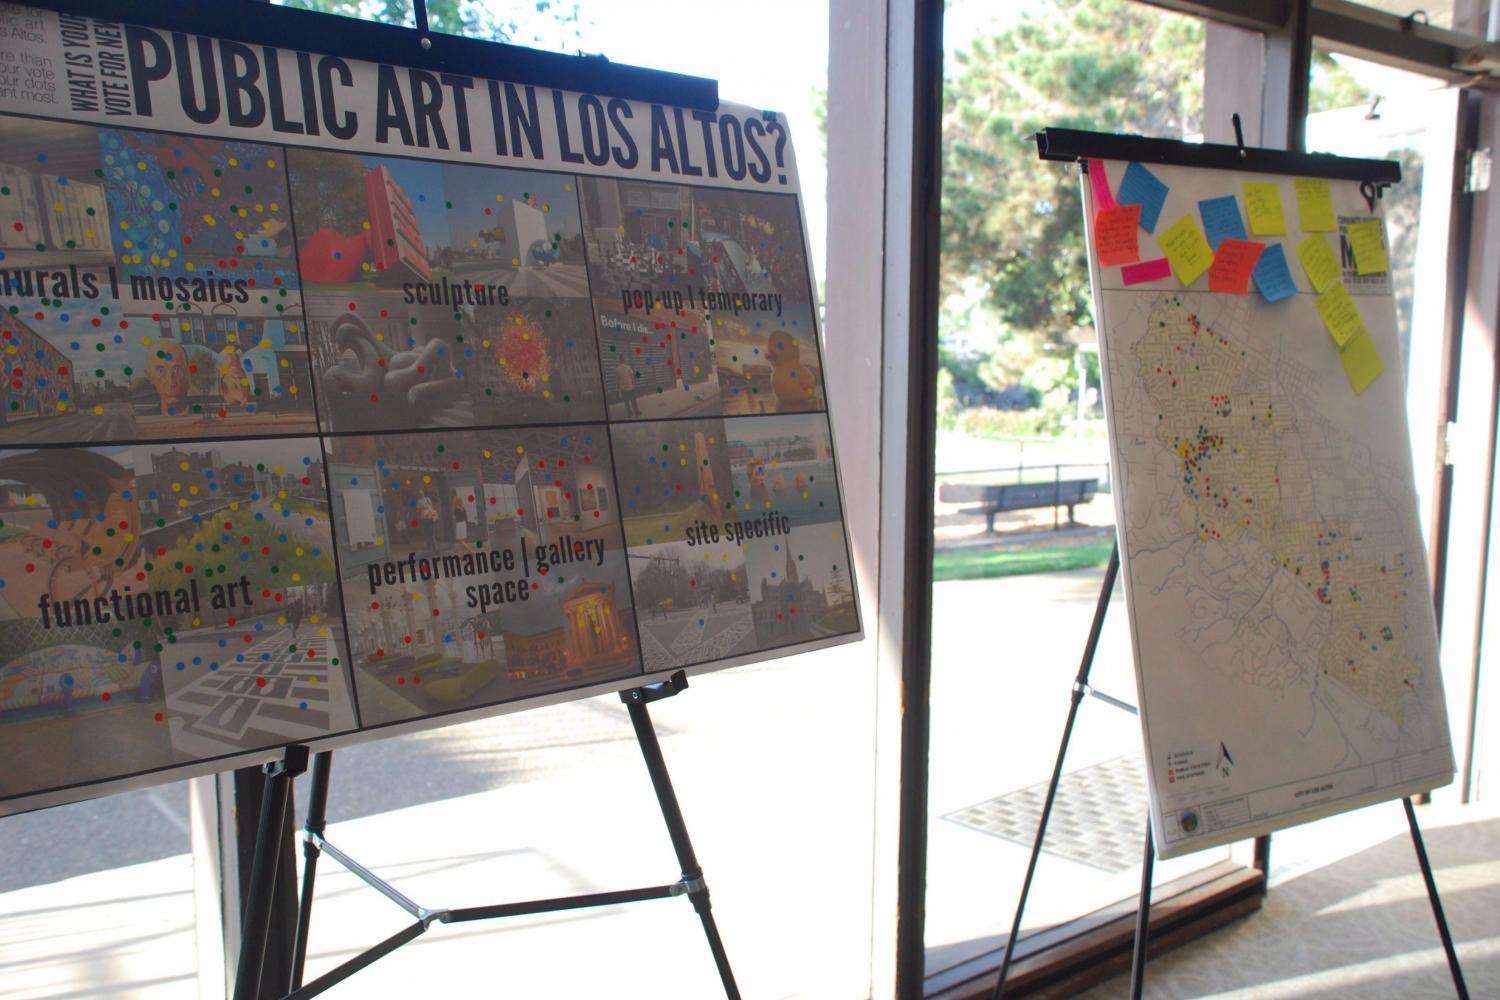 Citys Public Arts Committee Develops Master Plan For New Works